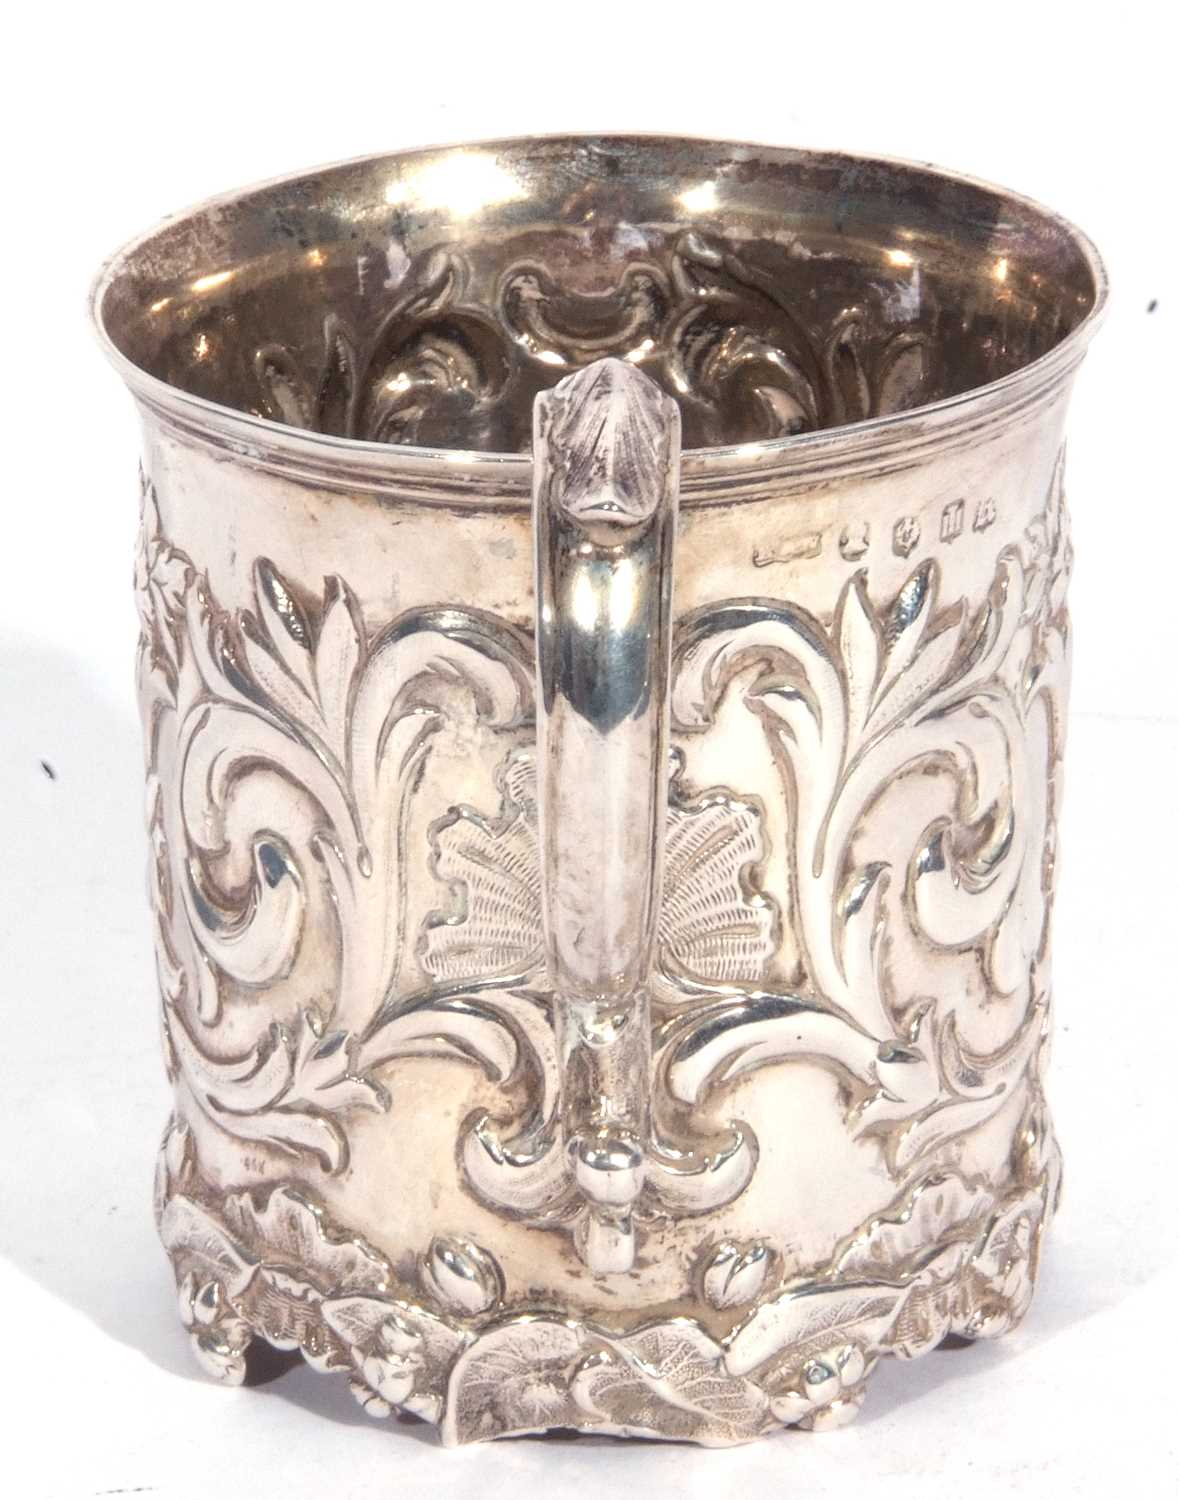 Scottish silver mug of cylindrical form, elaborately embossed with flowers and scrolls around an - Image 3 of 6